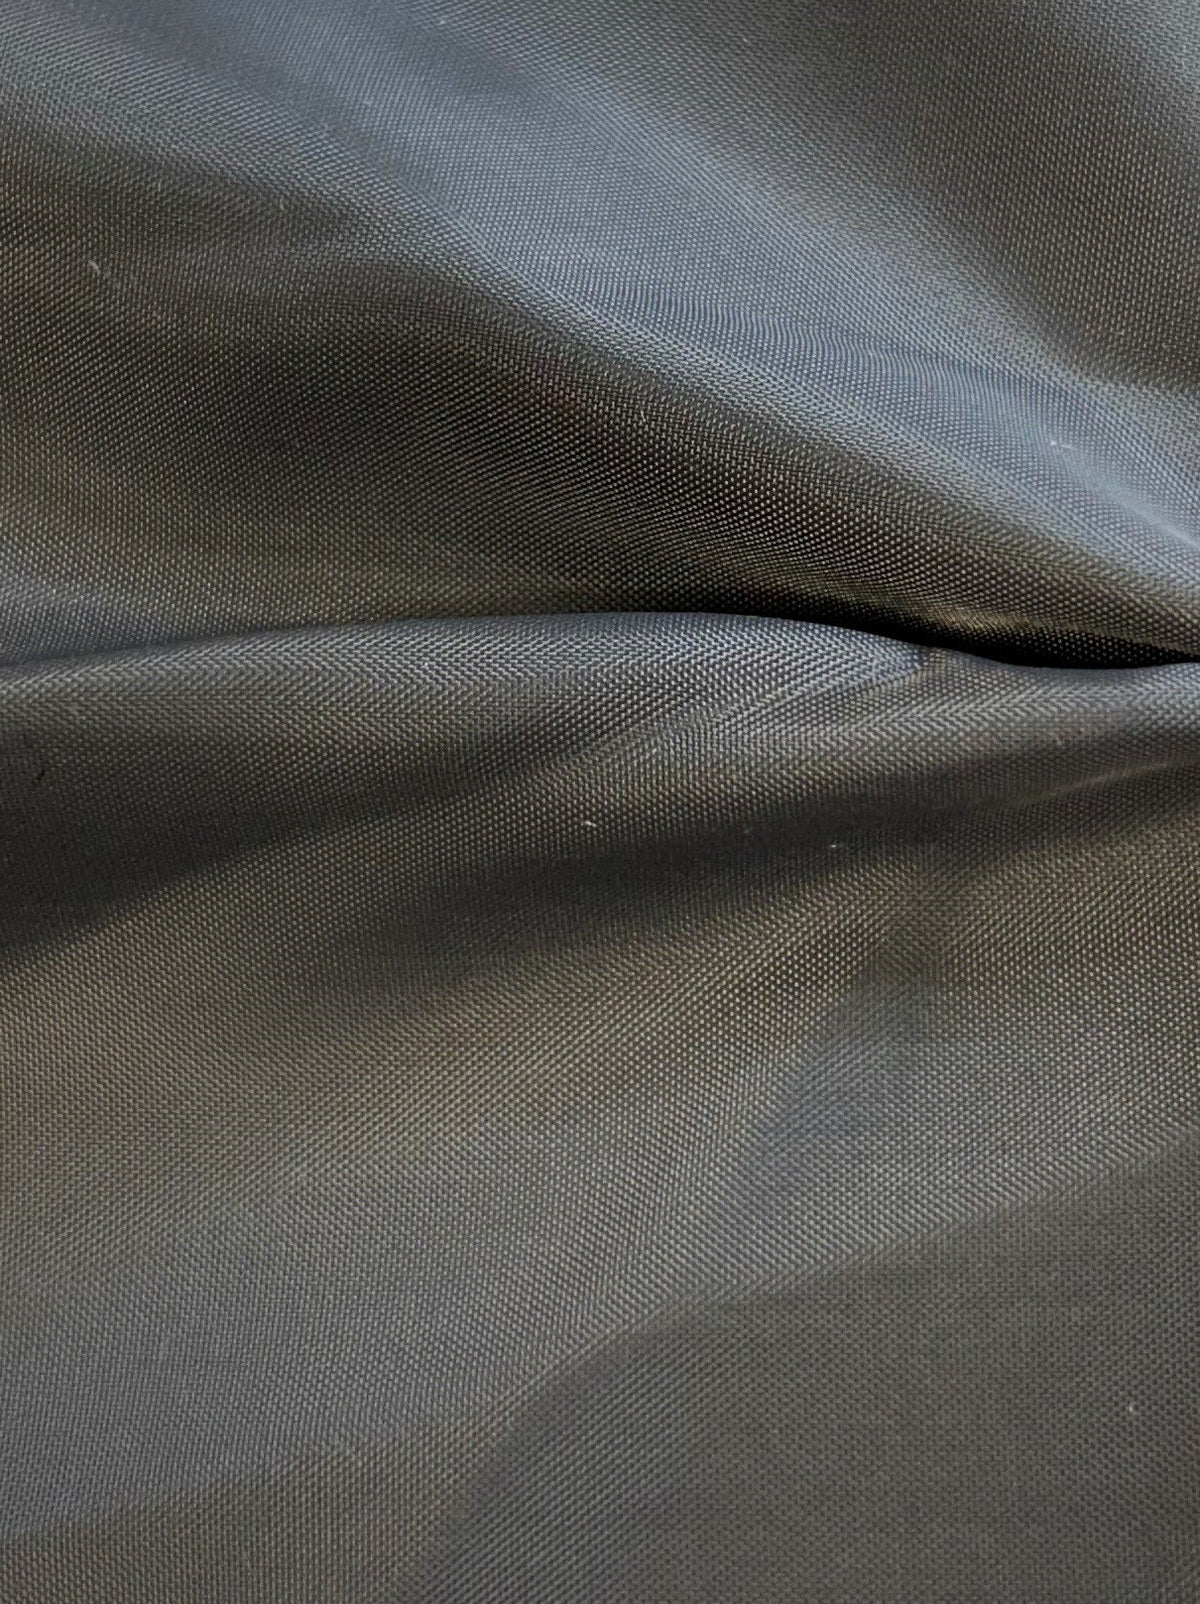 Pewter Polyester Lining Fabric - Eclipse